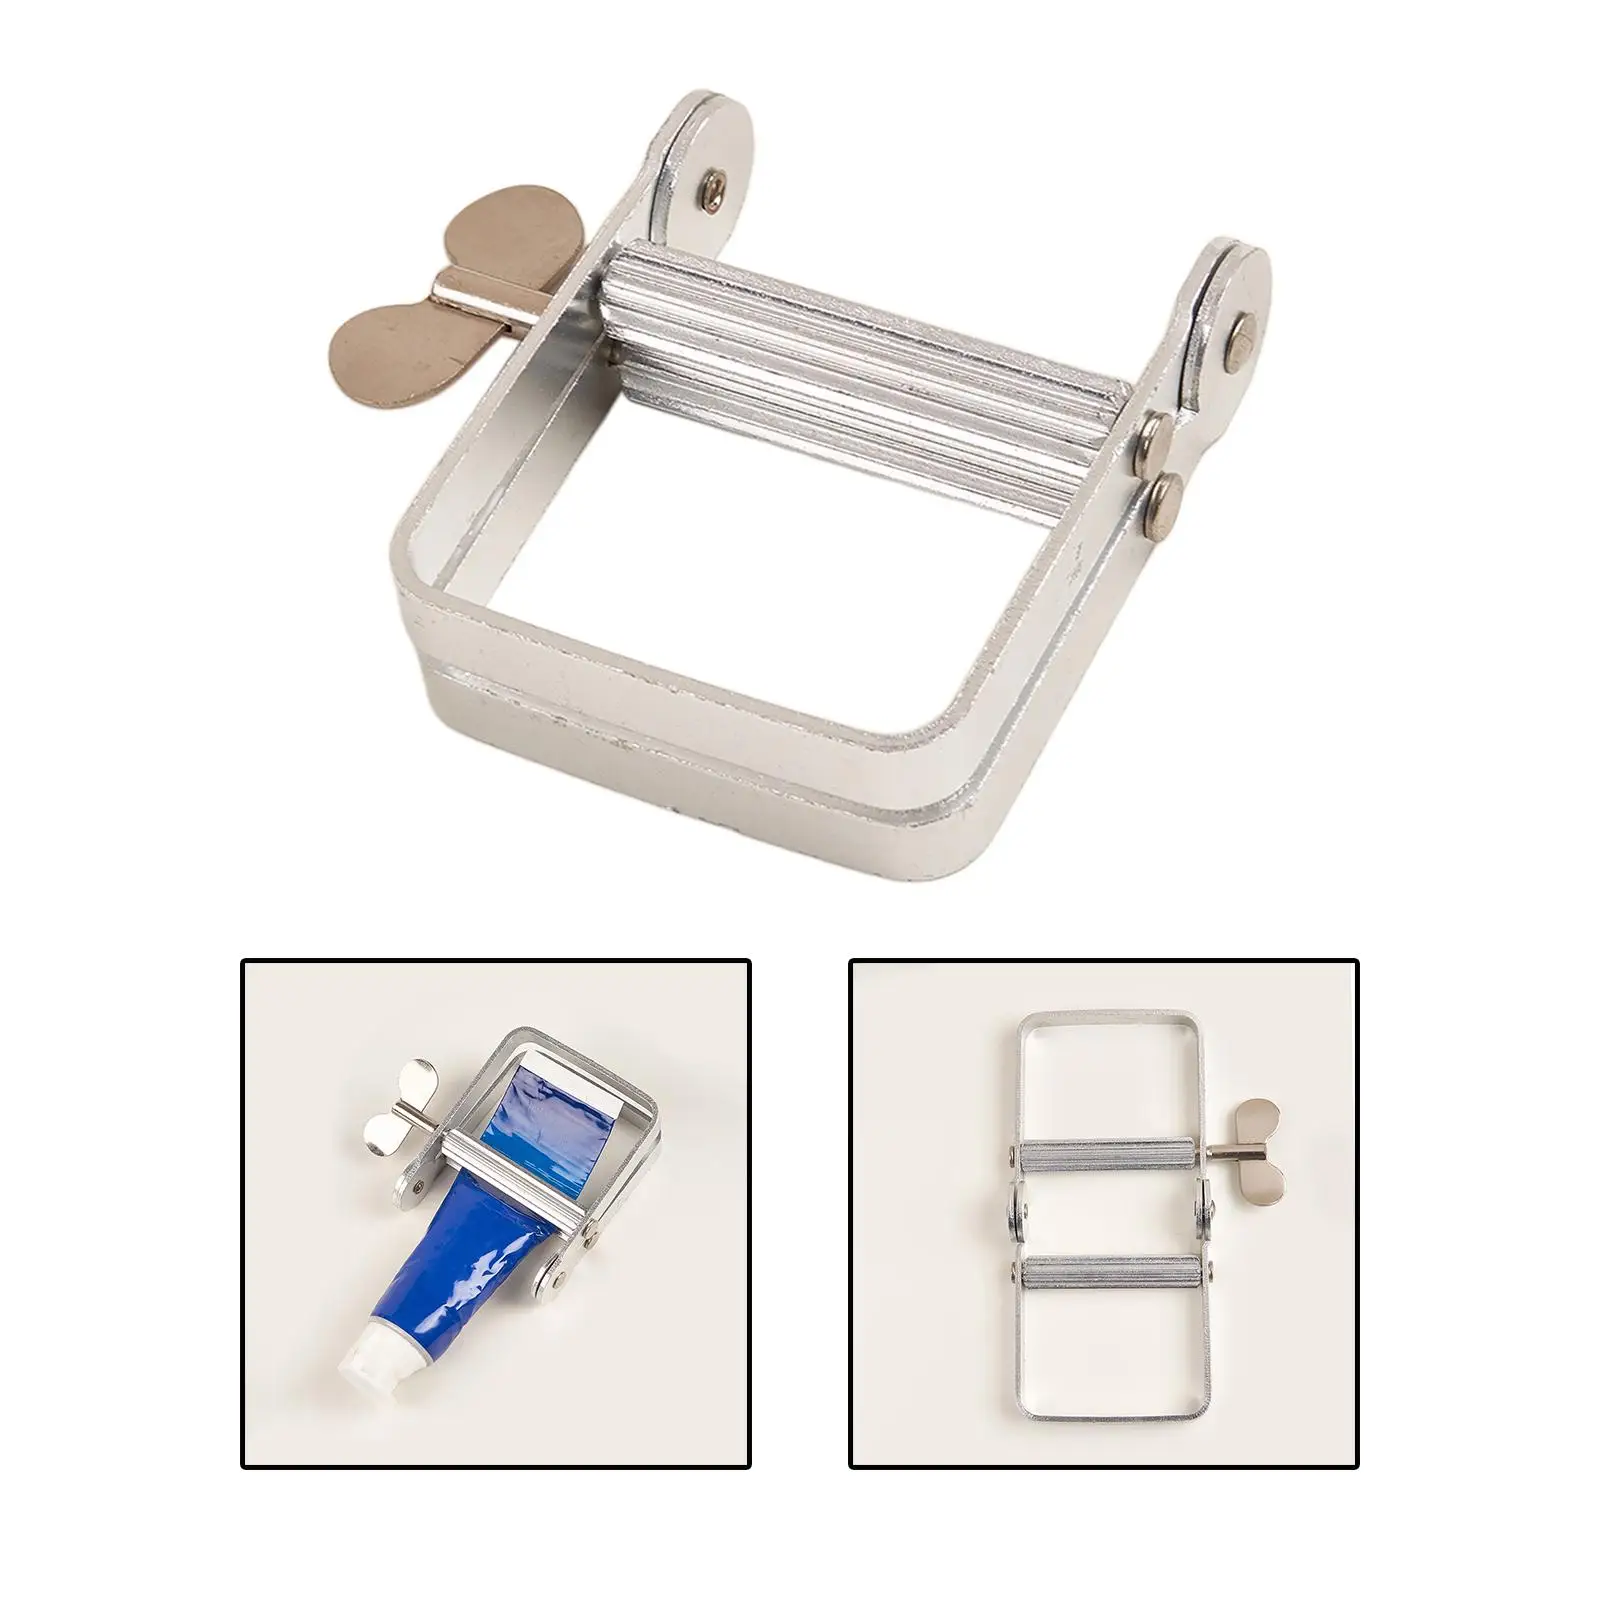 Oil Paint Extruder Portable Bathroom Accessory Toothpaste Tube Squeezer for Hair Salon Wasabi Tubes creams paint tubes